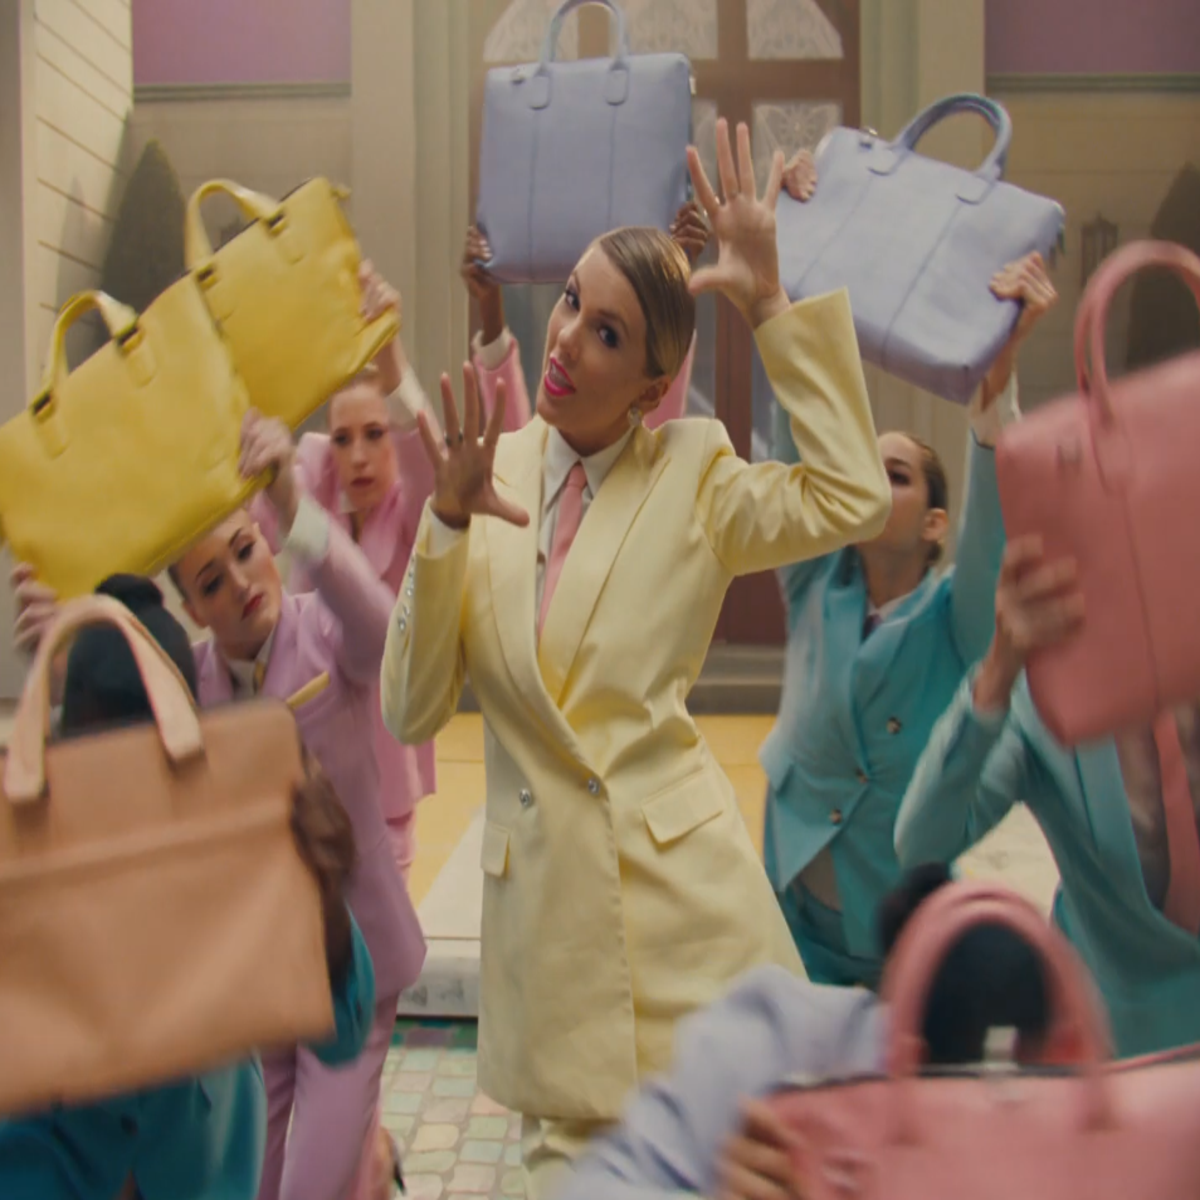 Taylor Swift's 'ME!' music video is packed with pricey pastel fashion